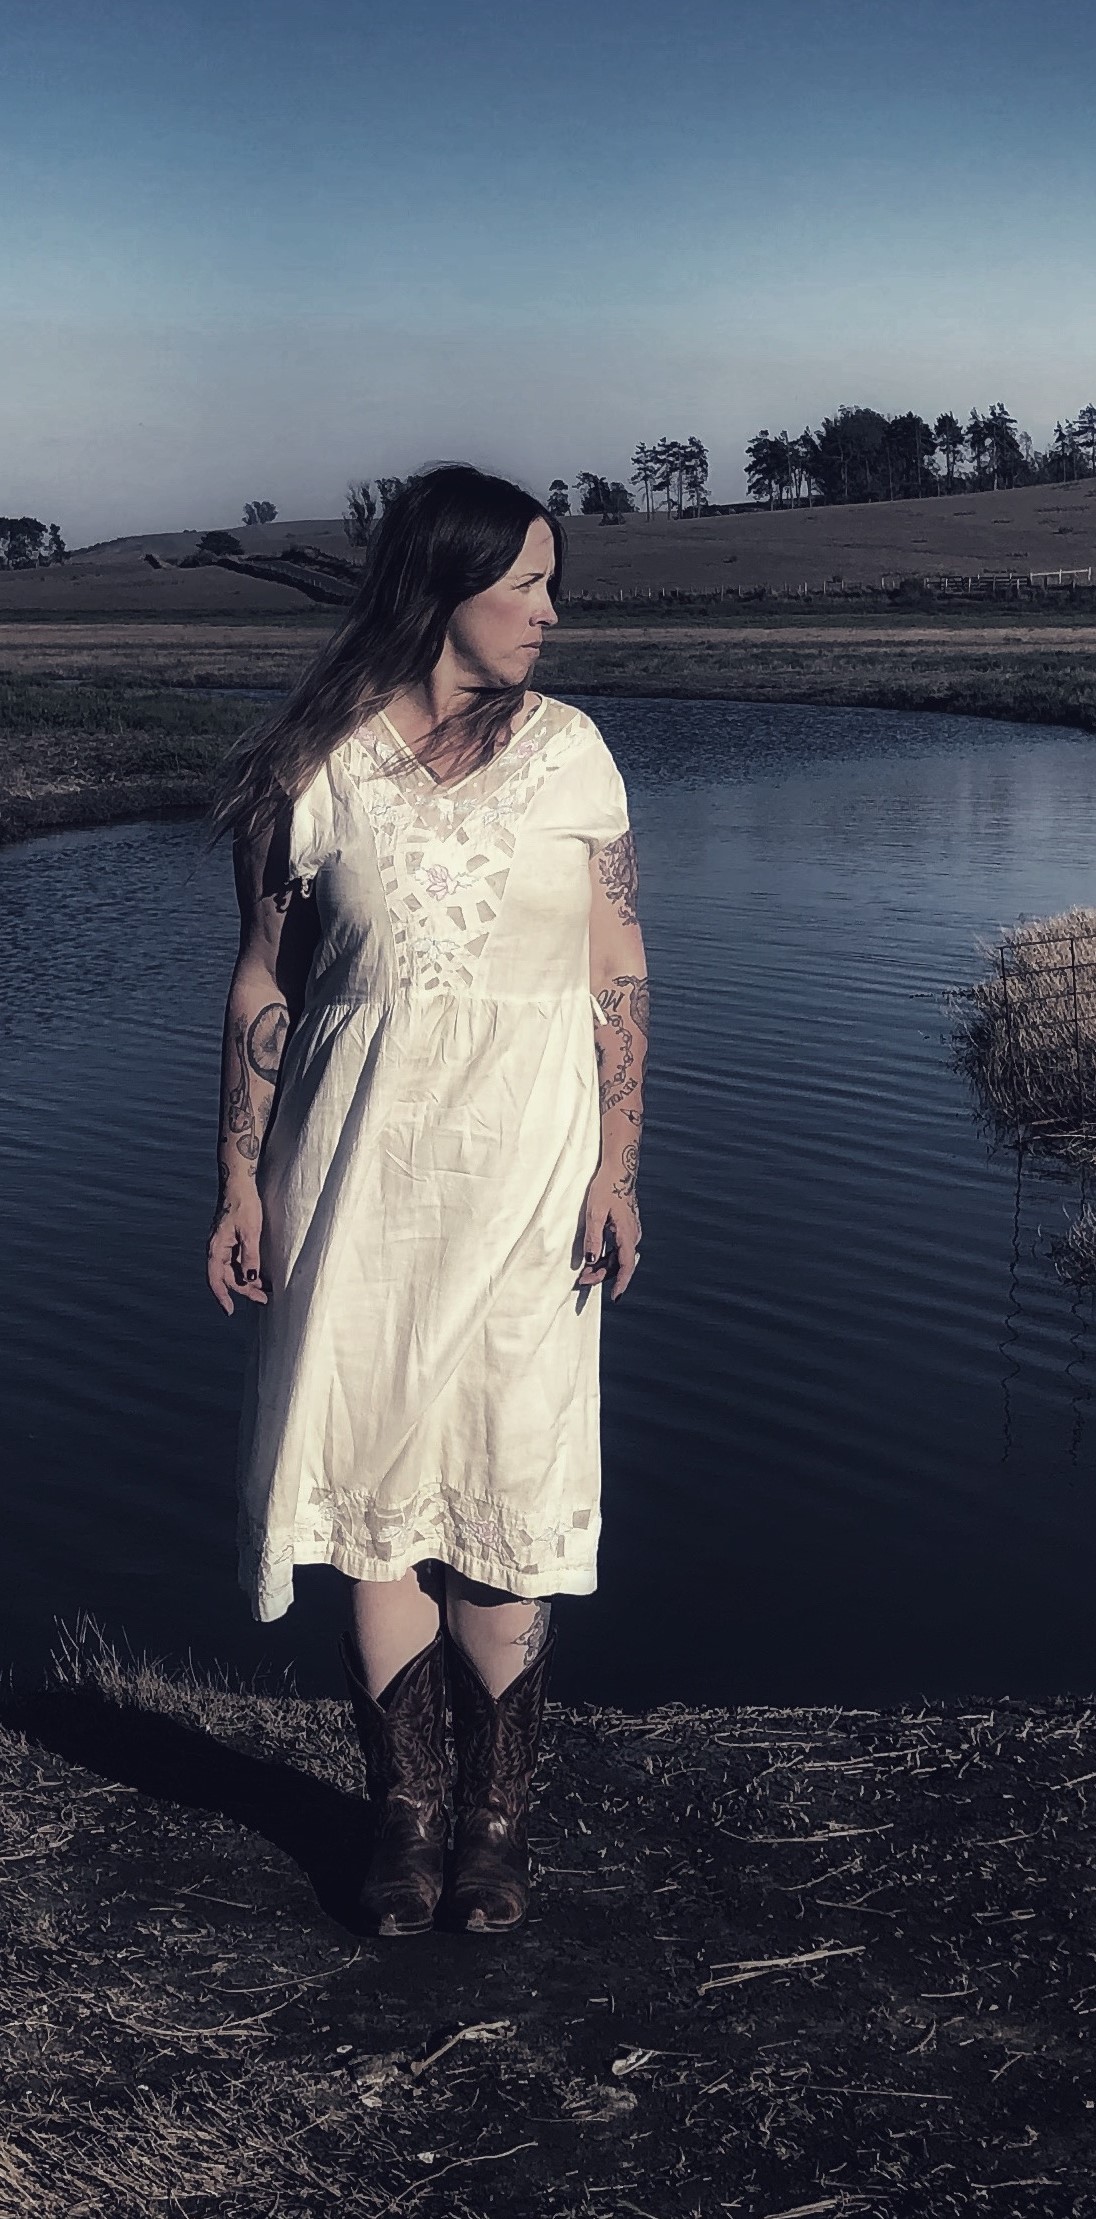 Woman in dress standing in front of pond